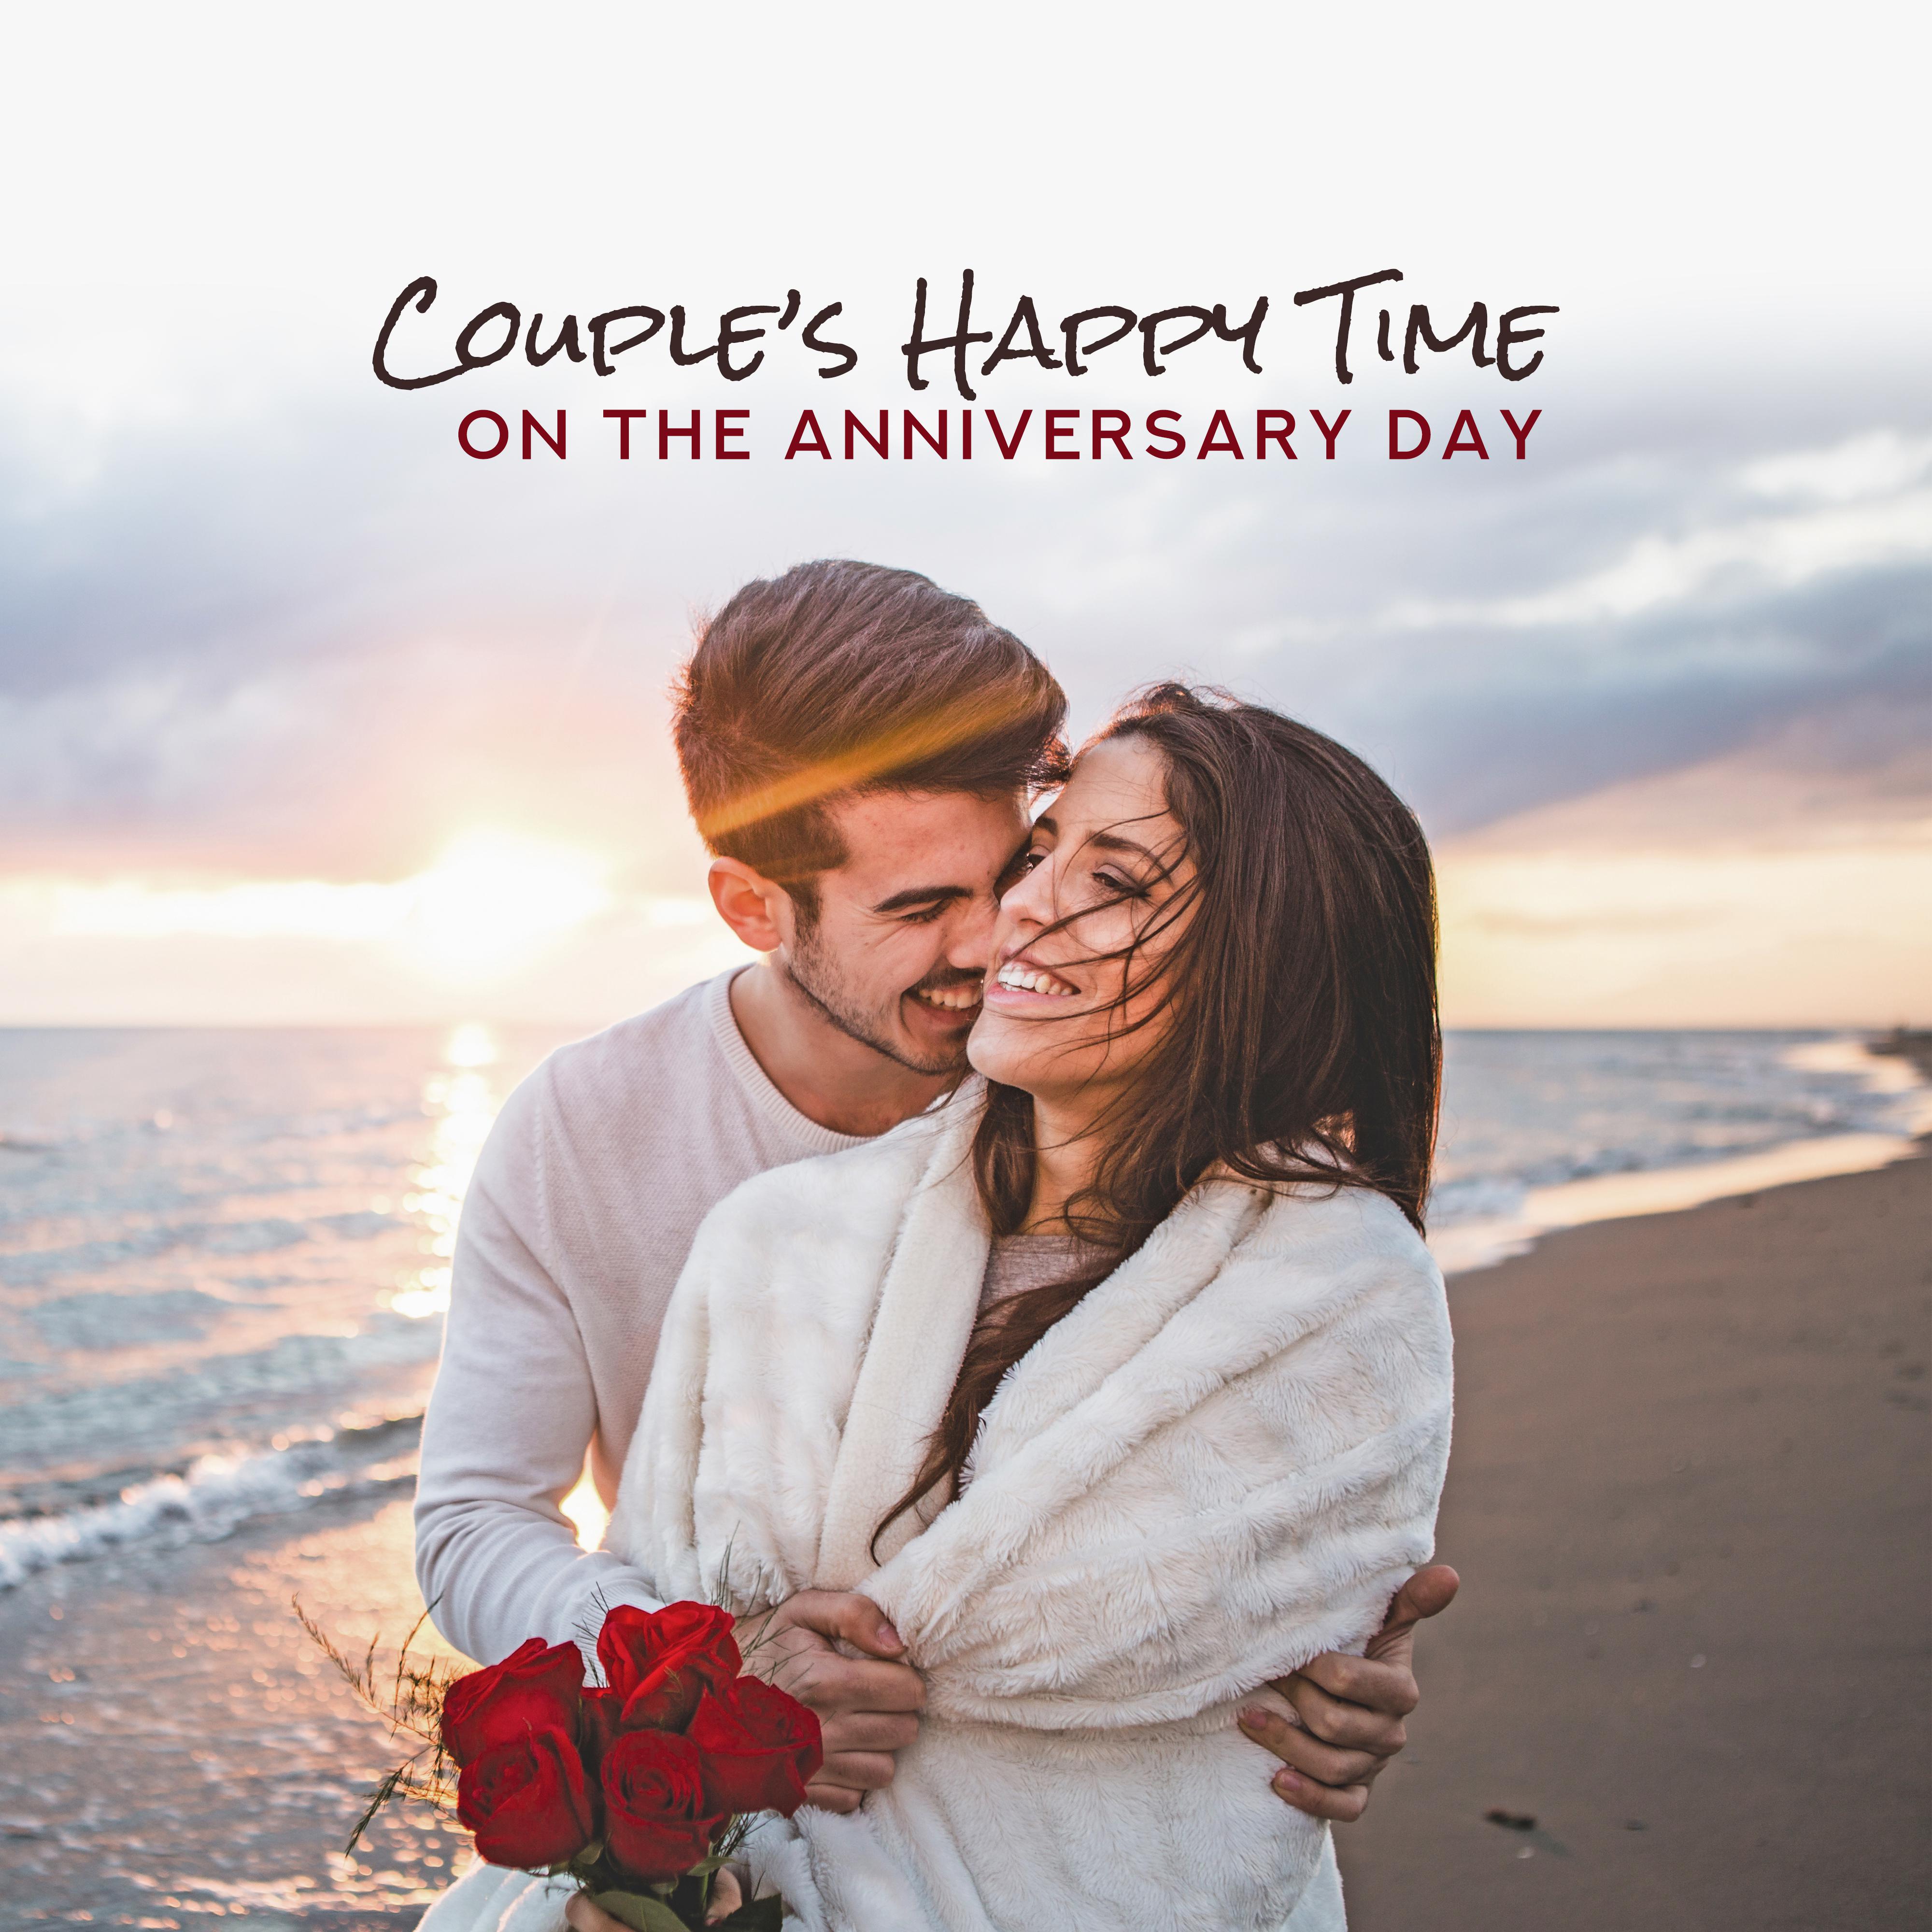 Couple' s Happy Time on the Anniversary Day: Soft Piano Jazz Music Compilation for Romantic Moments in the Restaurant or at Home